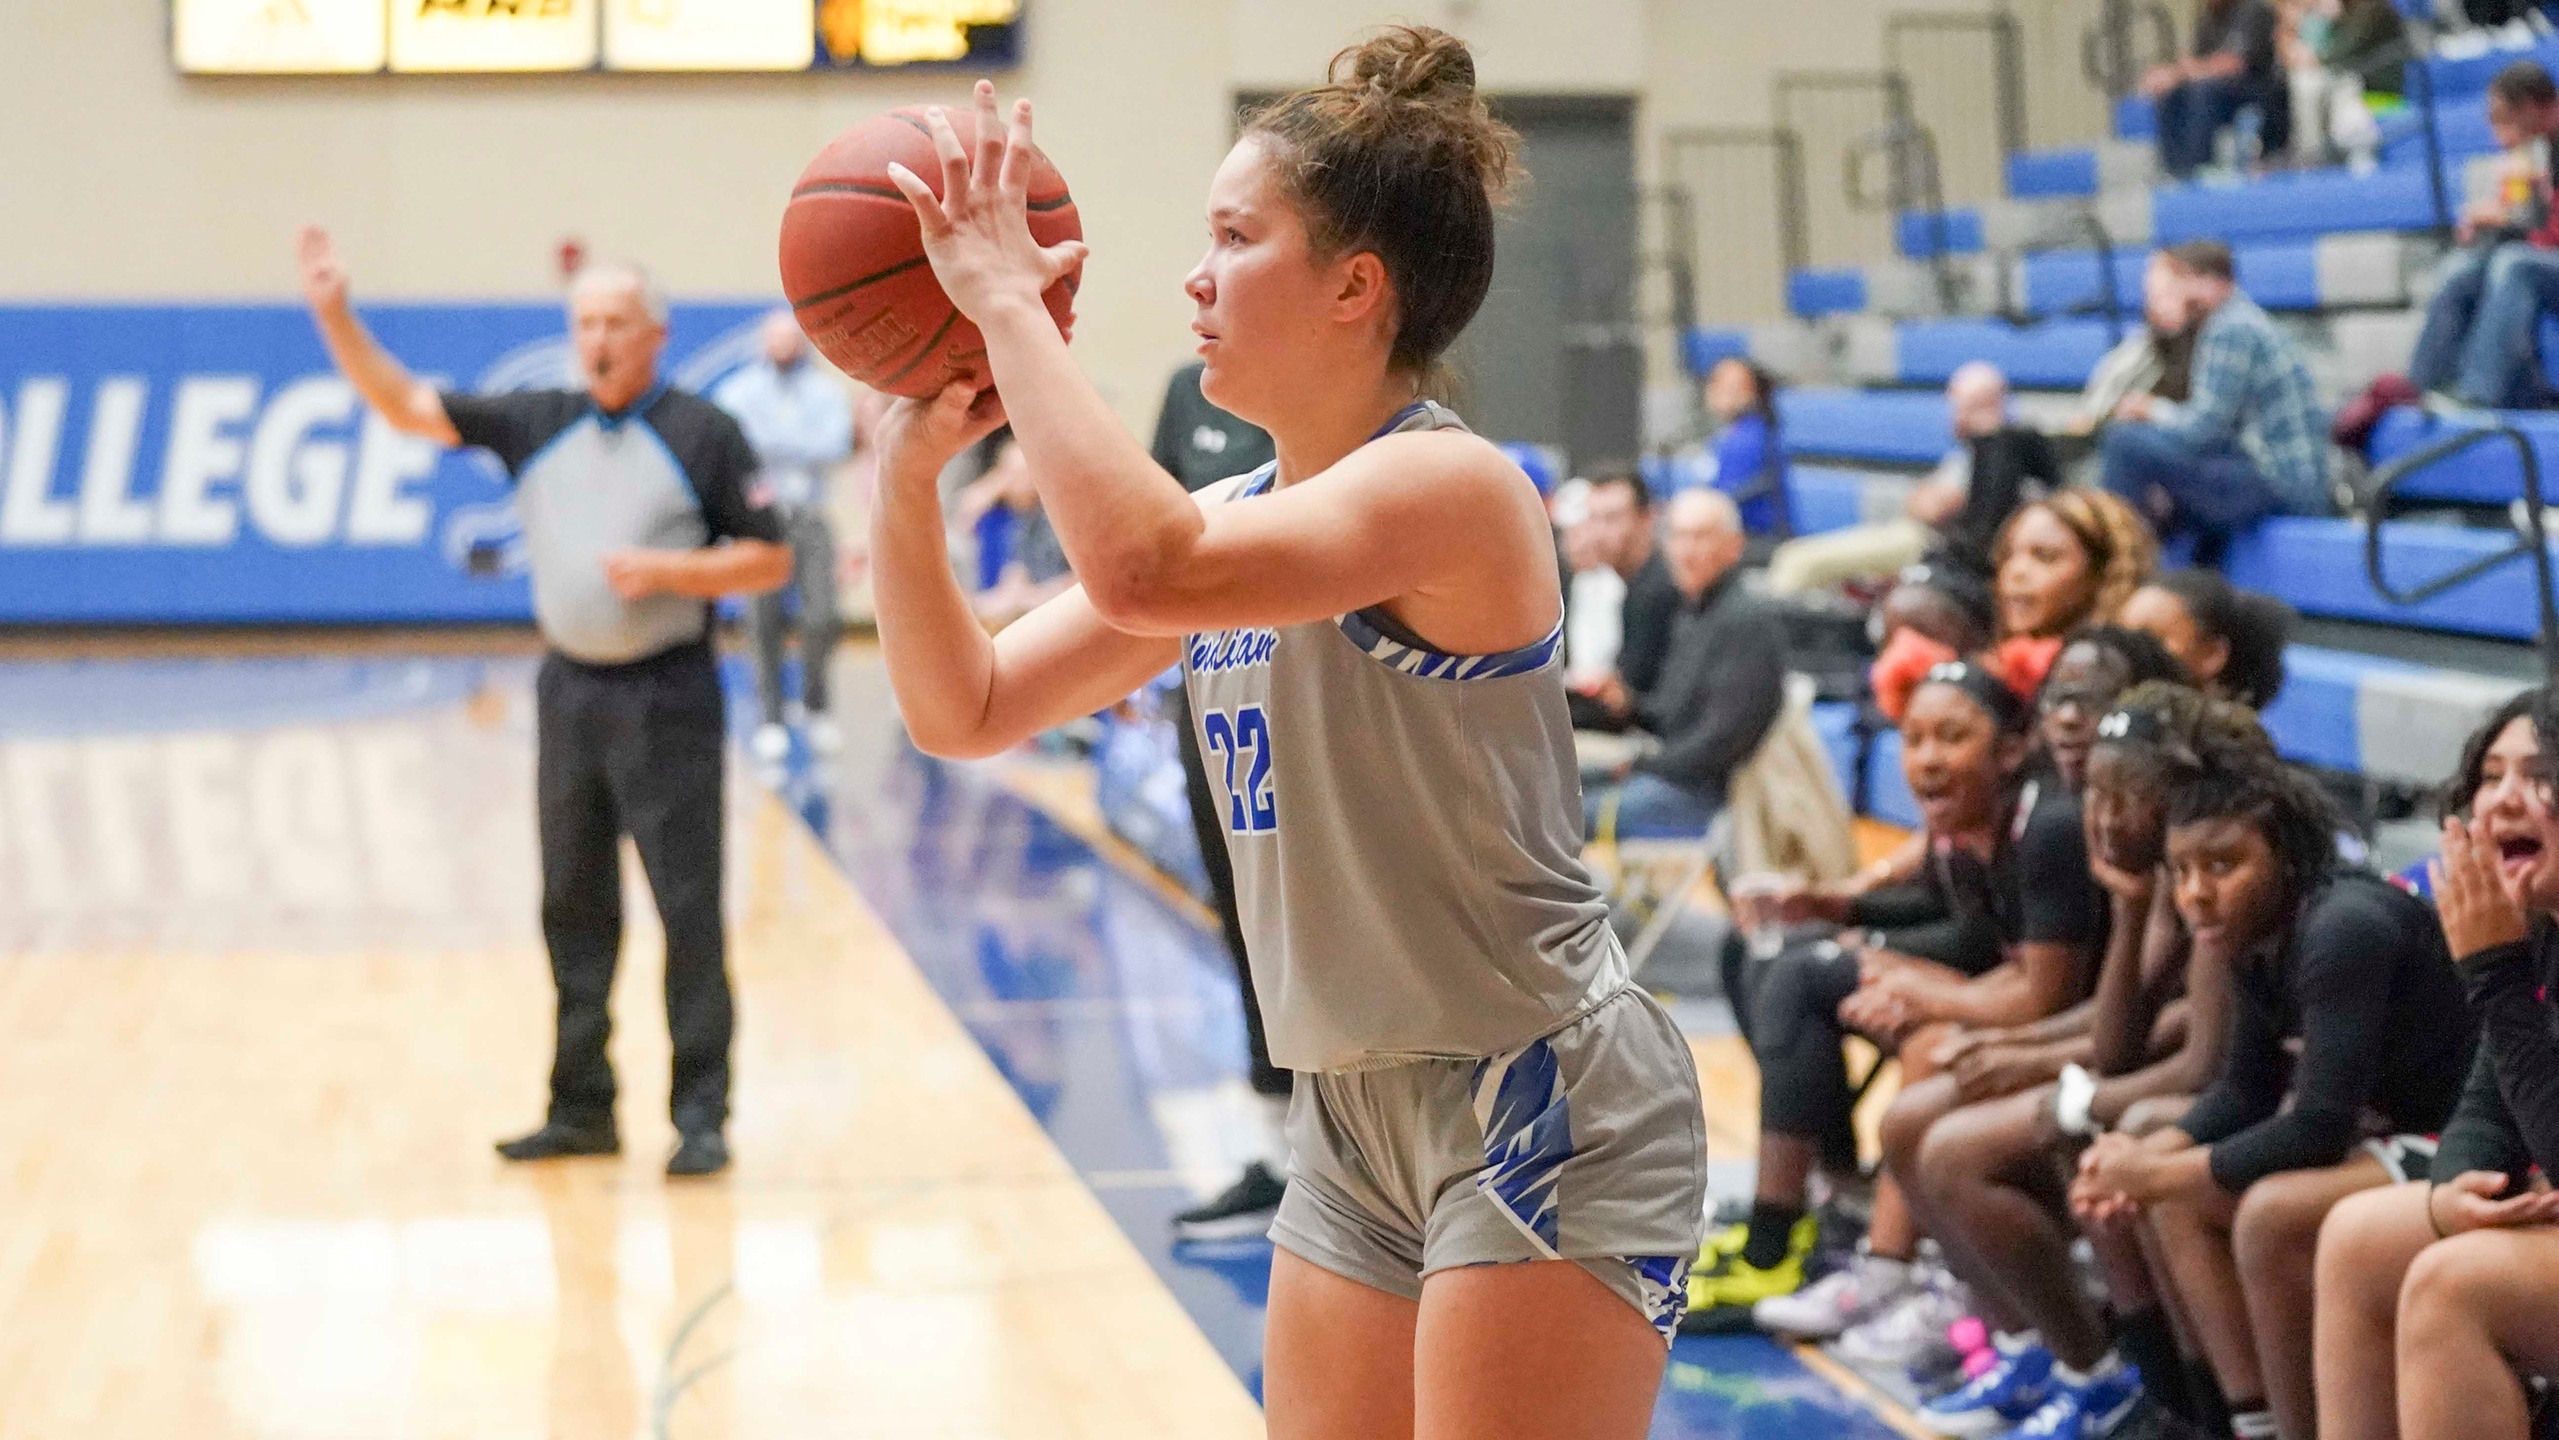 MCC Women claim NCCAC title with 78-49 win over Central